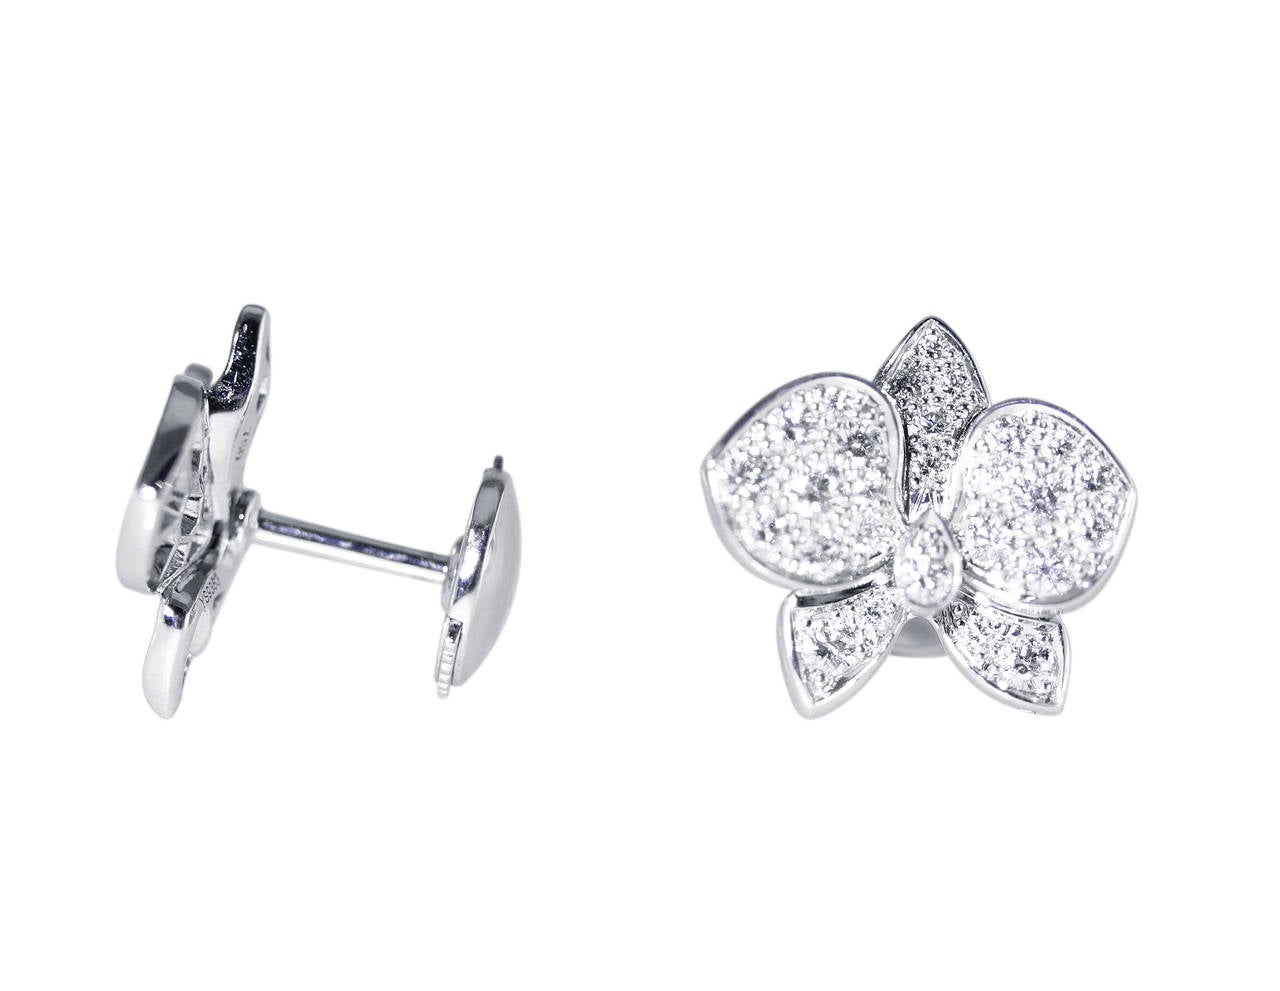 A pair of 18 karat white gold and diamond 'Orchid' Earrings by Cartier, designed as orchid flowerheads set with 54 round diamonds weighing approximately 1.10 carats, gross weight 4.7 grams, measuring 1/2 by 1/2 inch, signed Cartier, numbered YS9363,